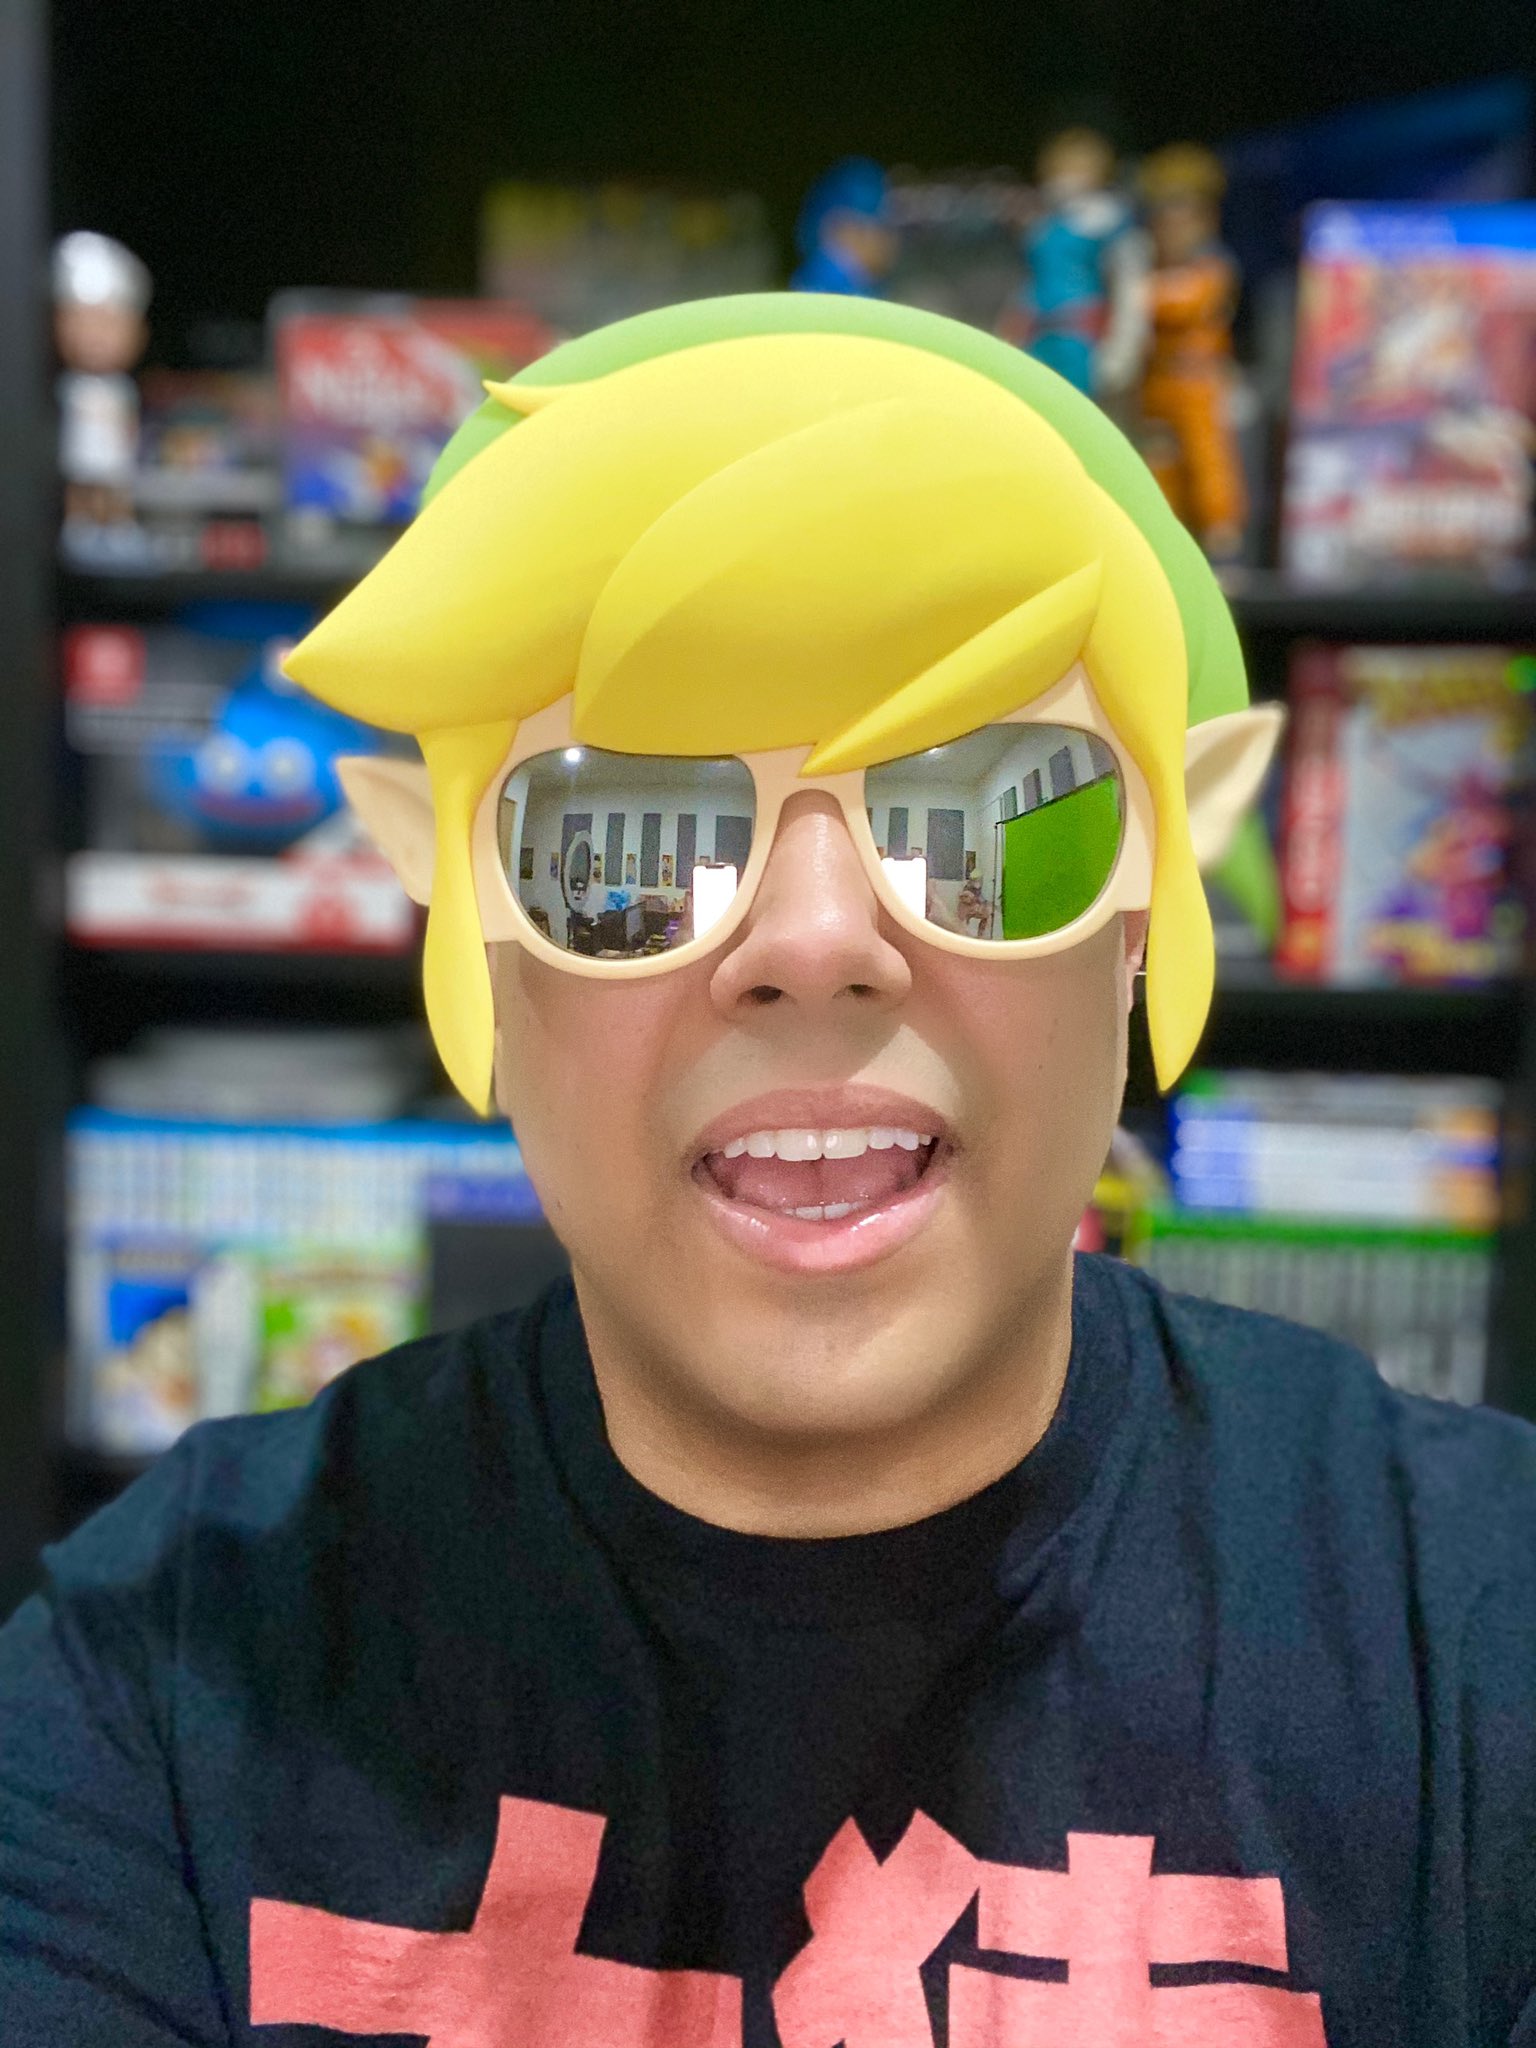 DashieXP on X: Wait Zelda is trending here's my chance! Here's a